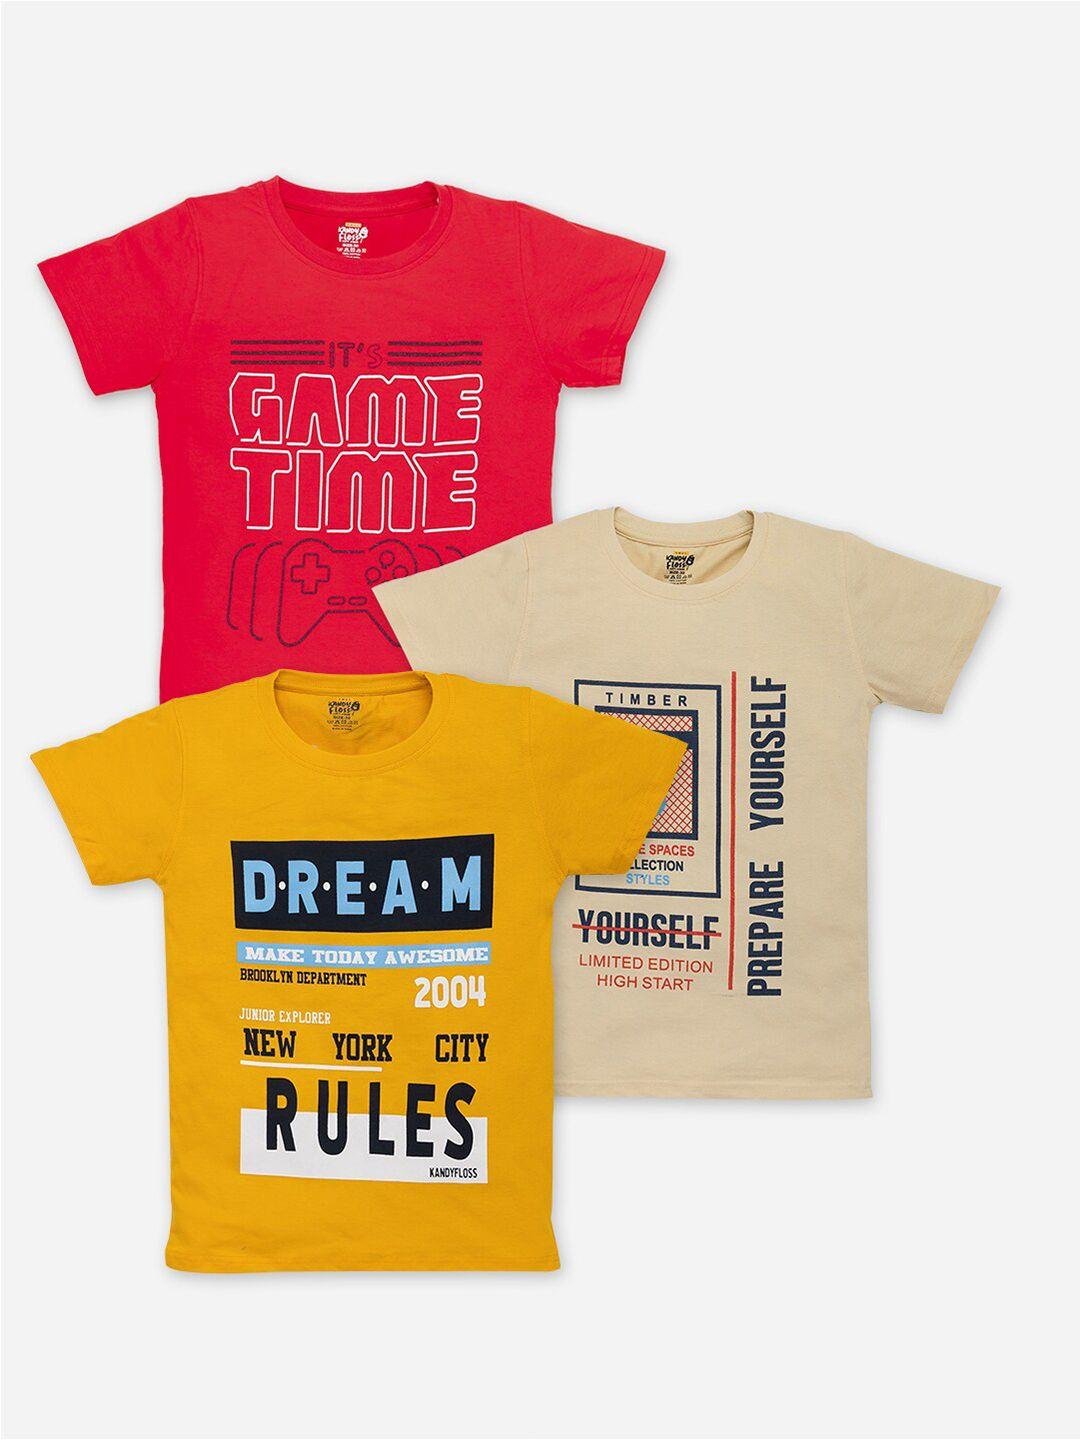 amul kandyfloss boys pack of 3 typography printed pure cotton t-shirts